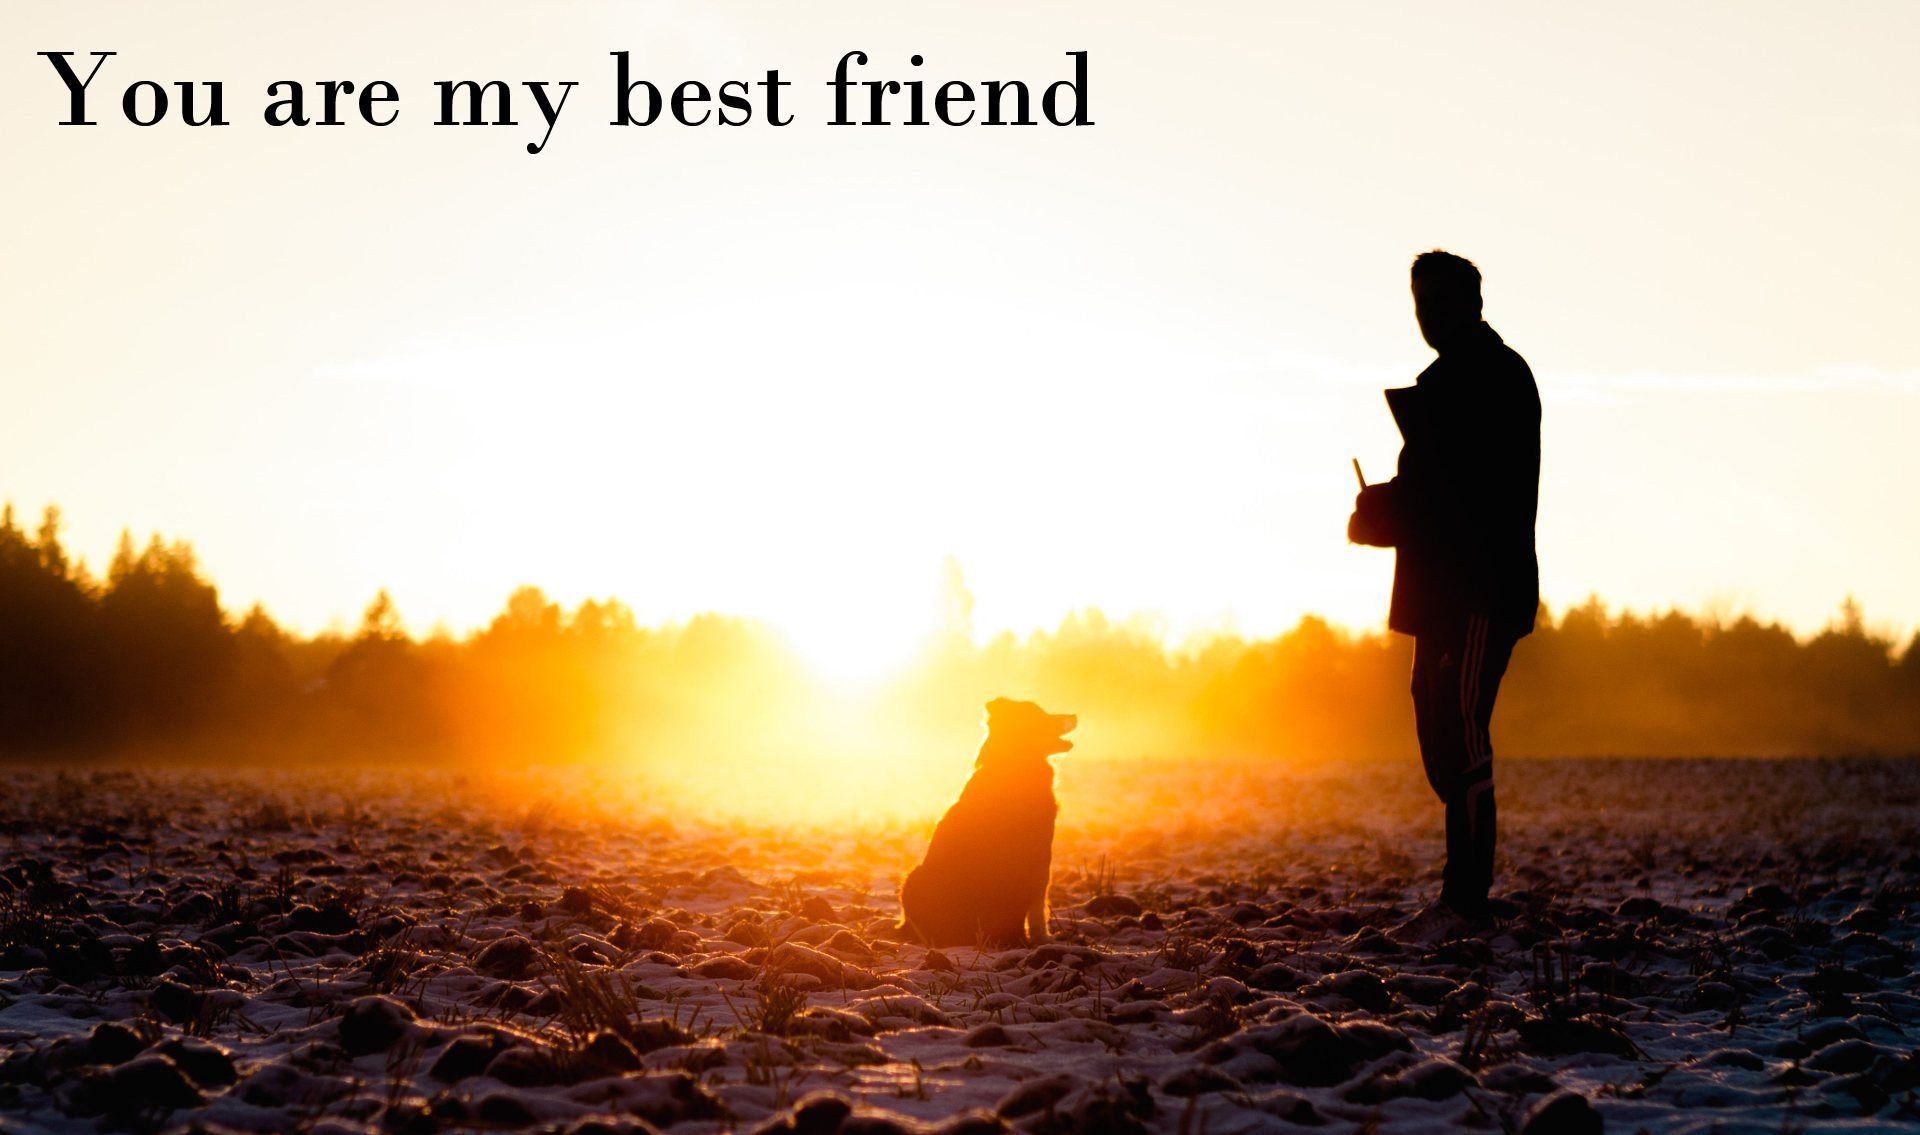 Related Best Friend Wallpaper For